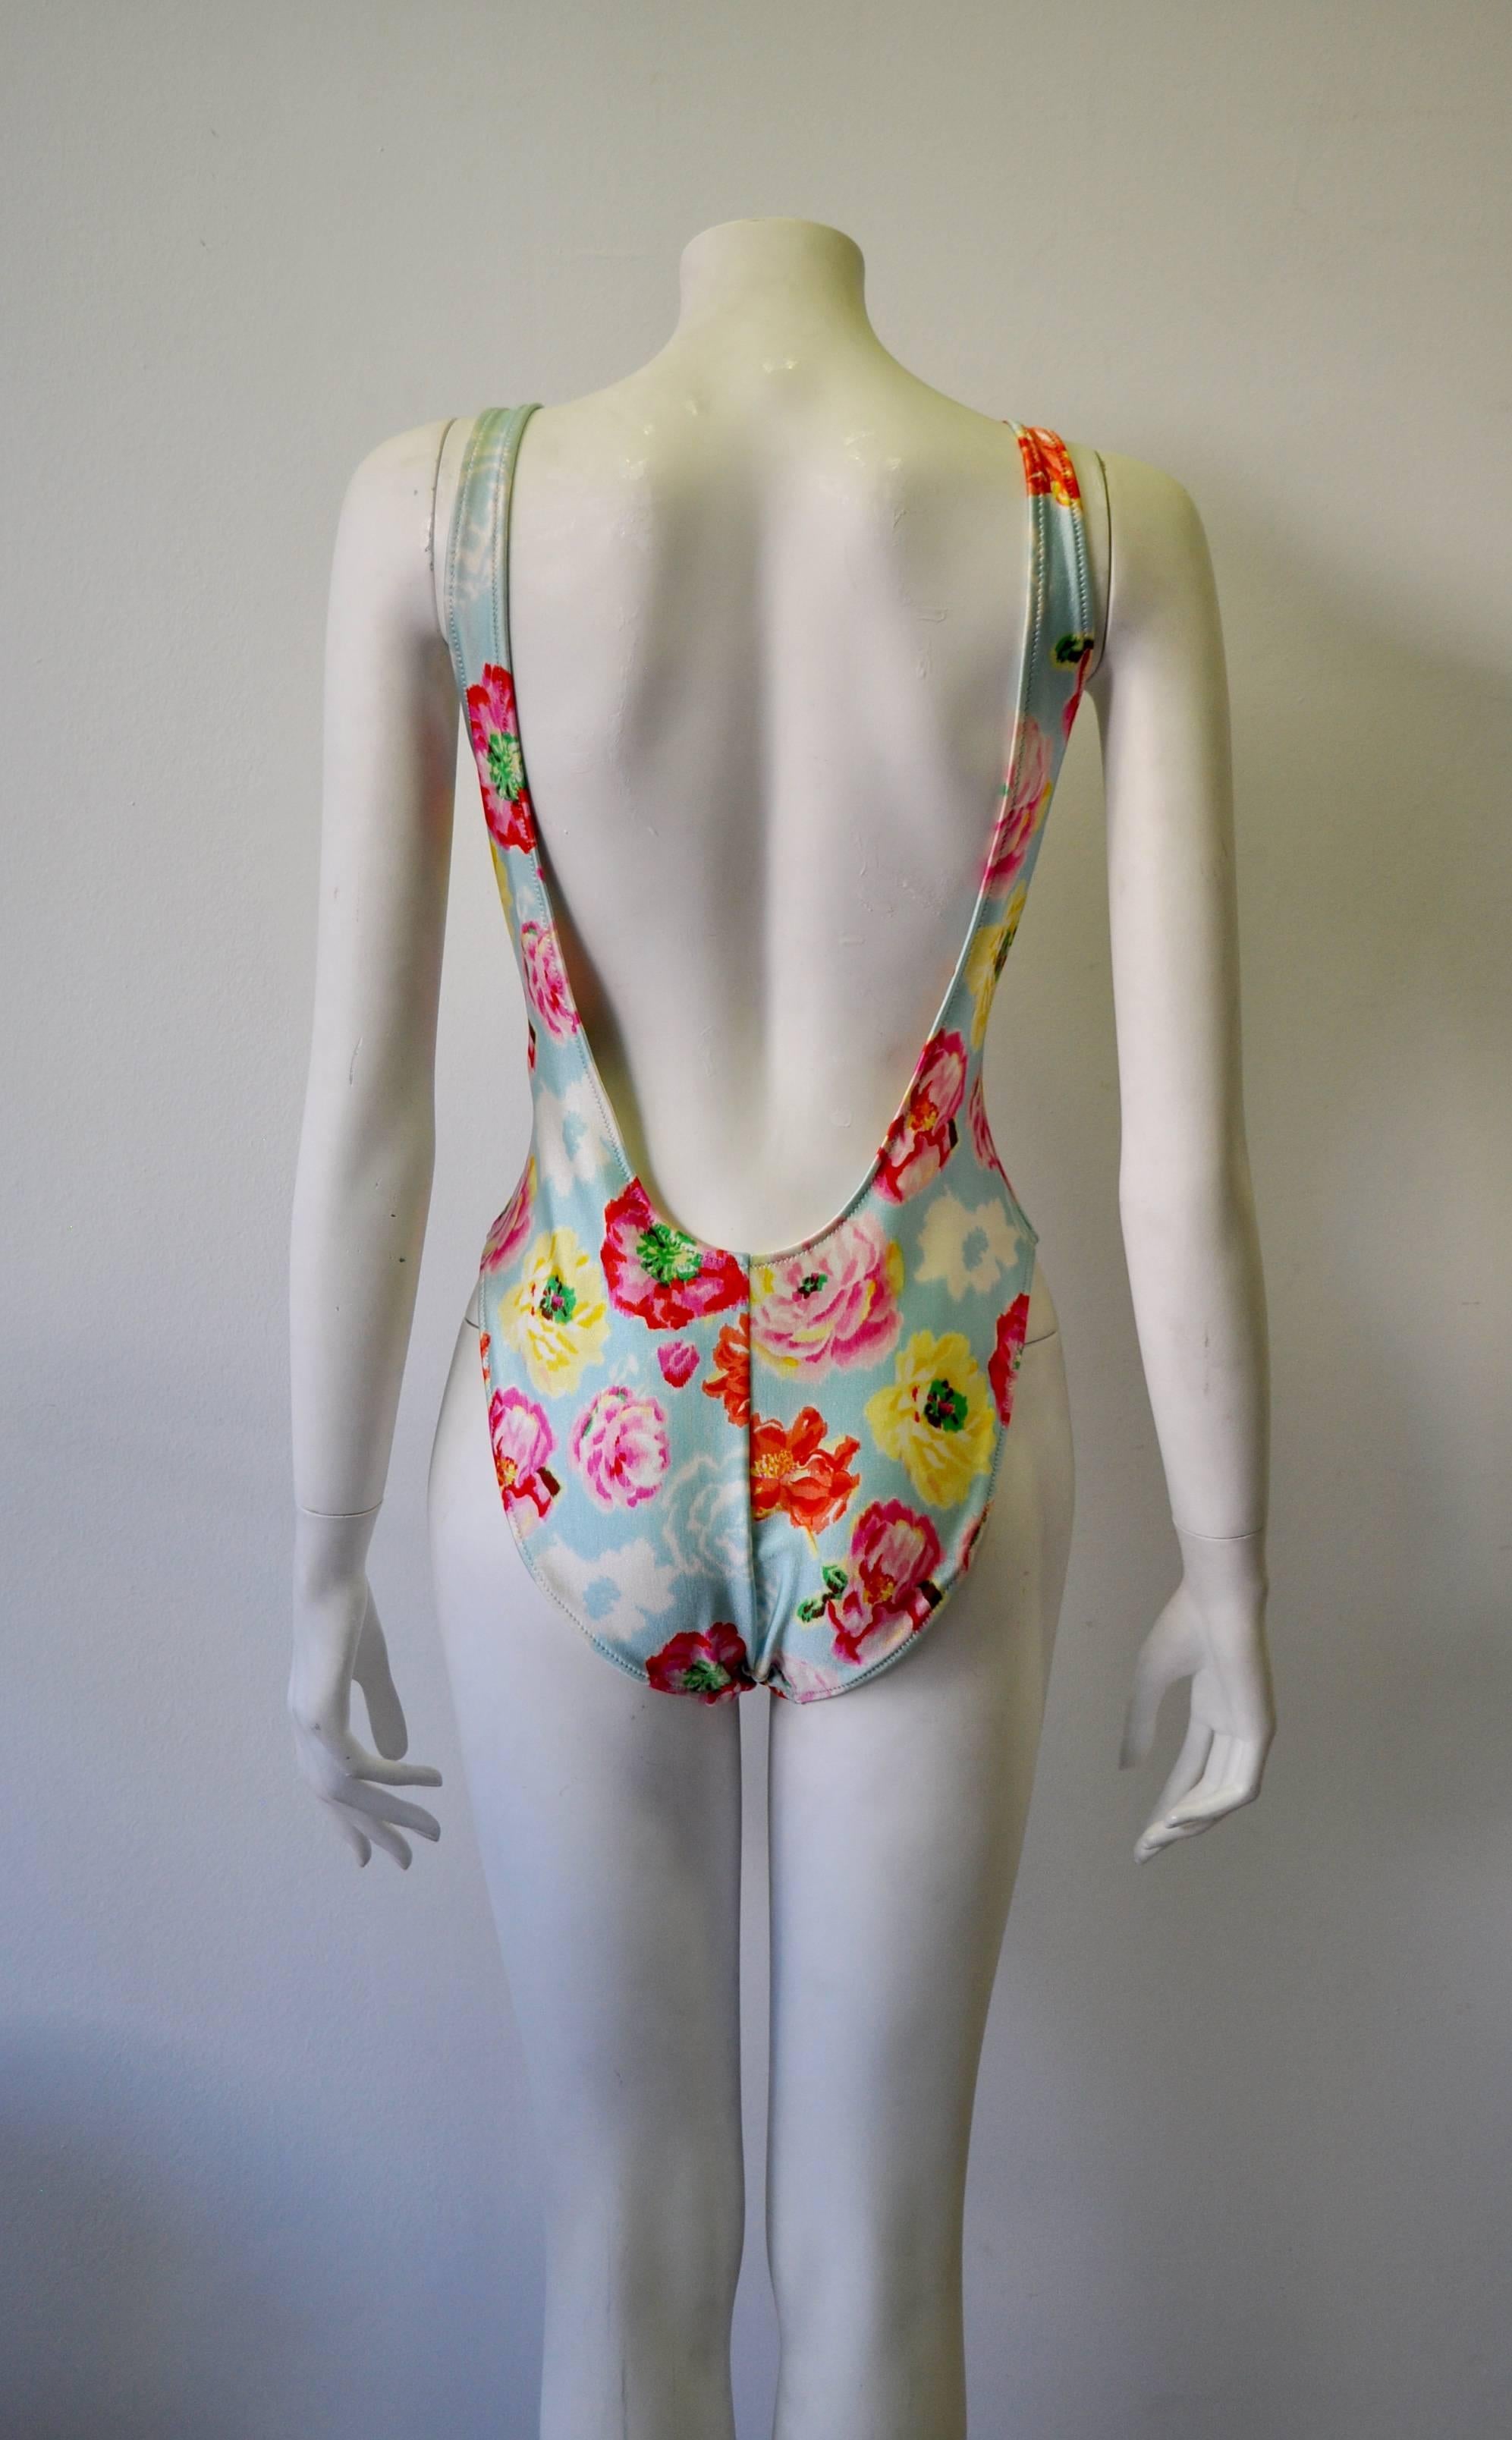 Women's Gianni Versace Istante Mare Spring Floral Bathing Suit